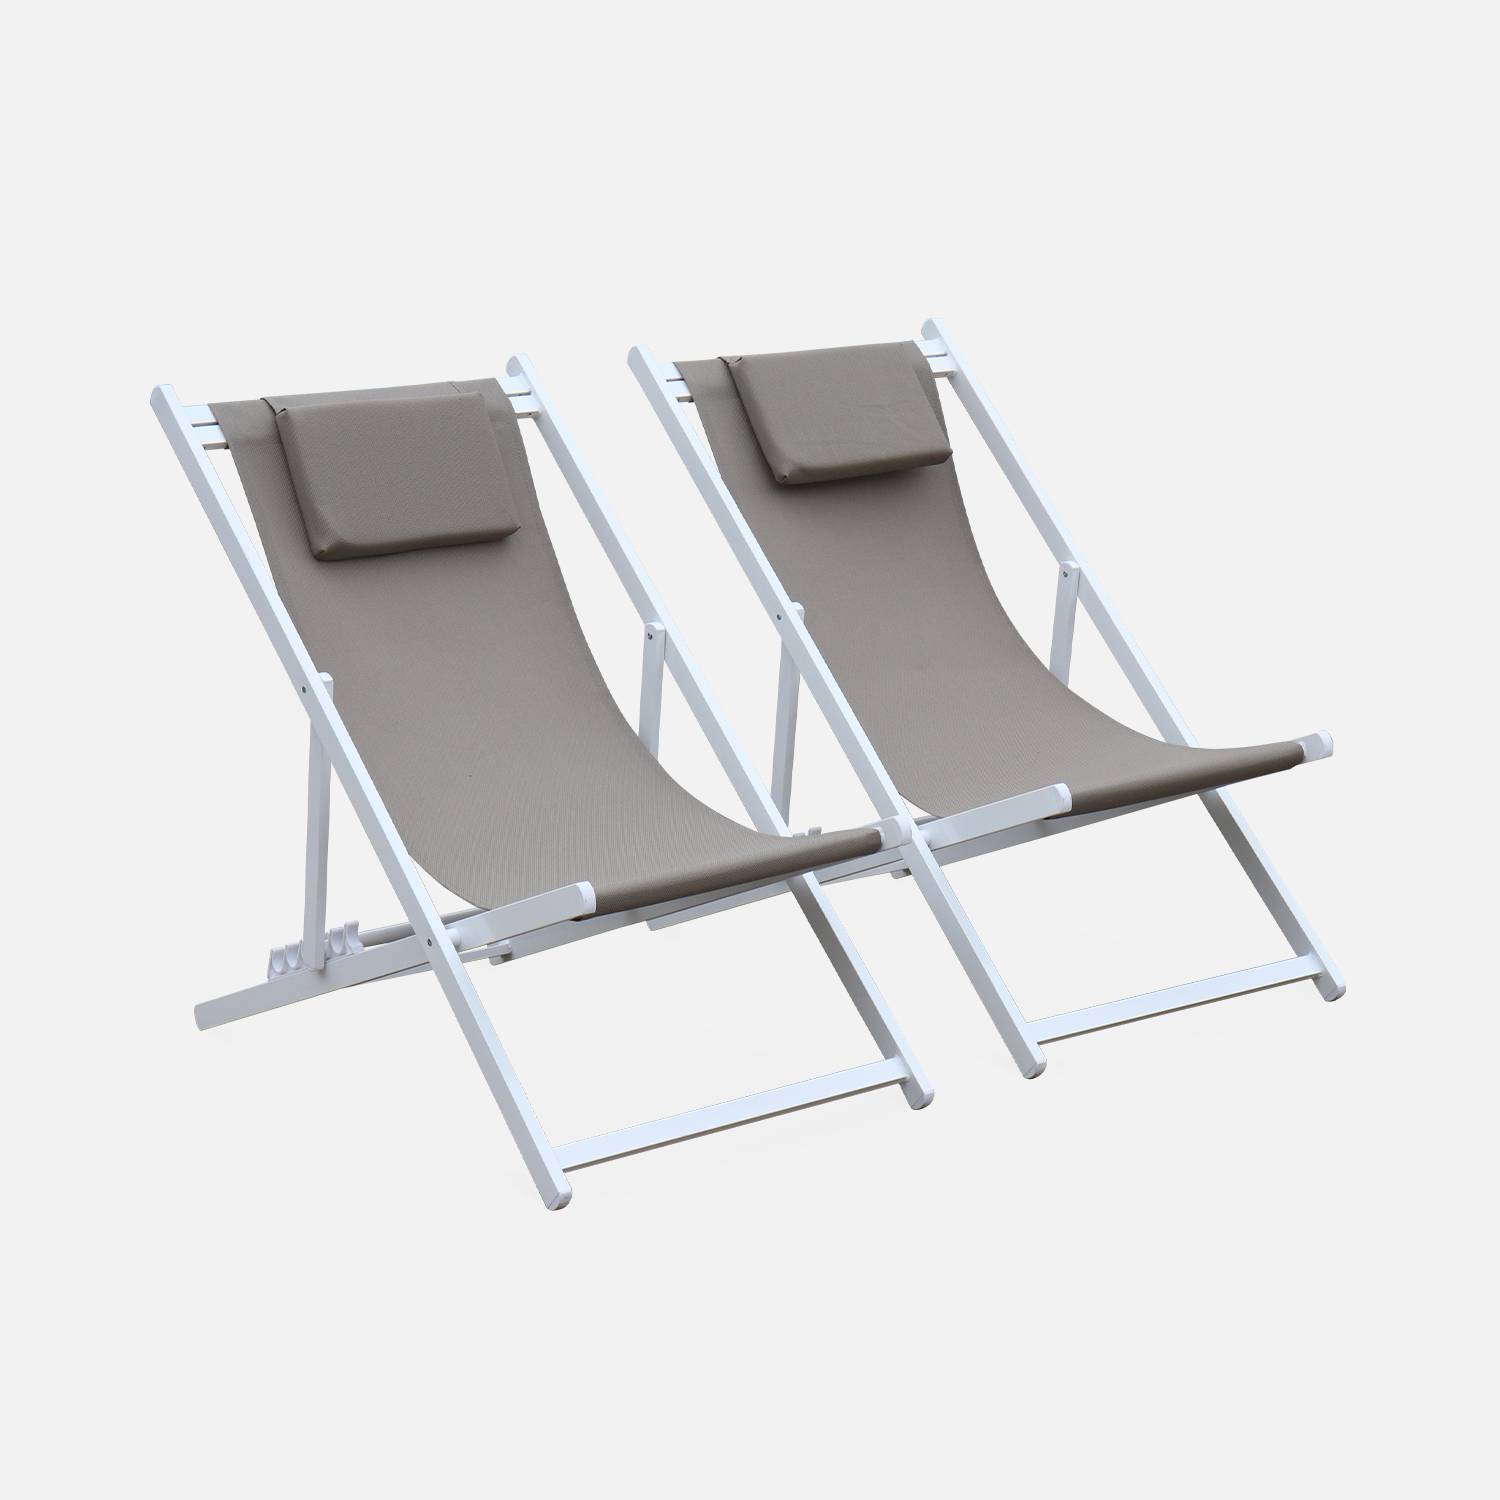 Set of 2 sun loungers - adjustable deck chairs with headrests made from aluminium frame - Gaia - White frame, Brown textilene,sweeek,Photo2